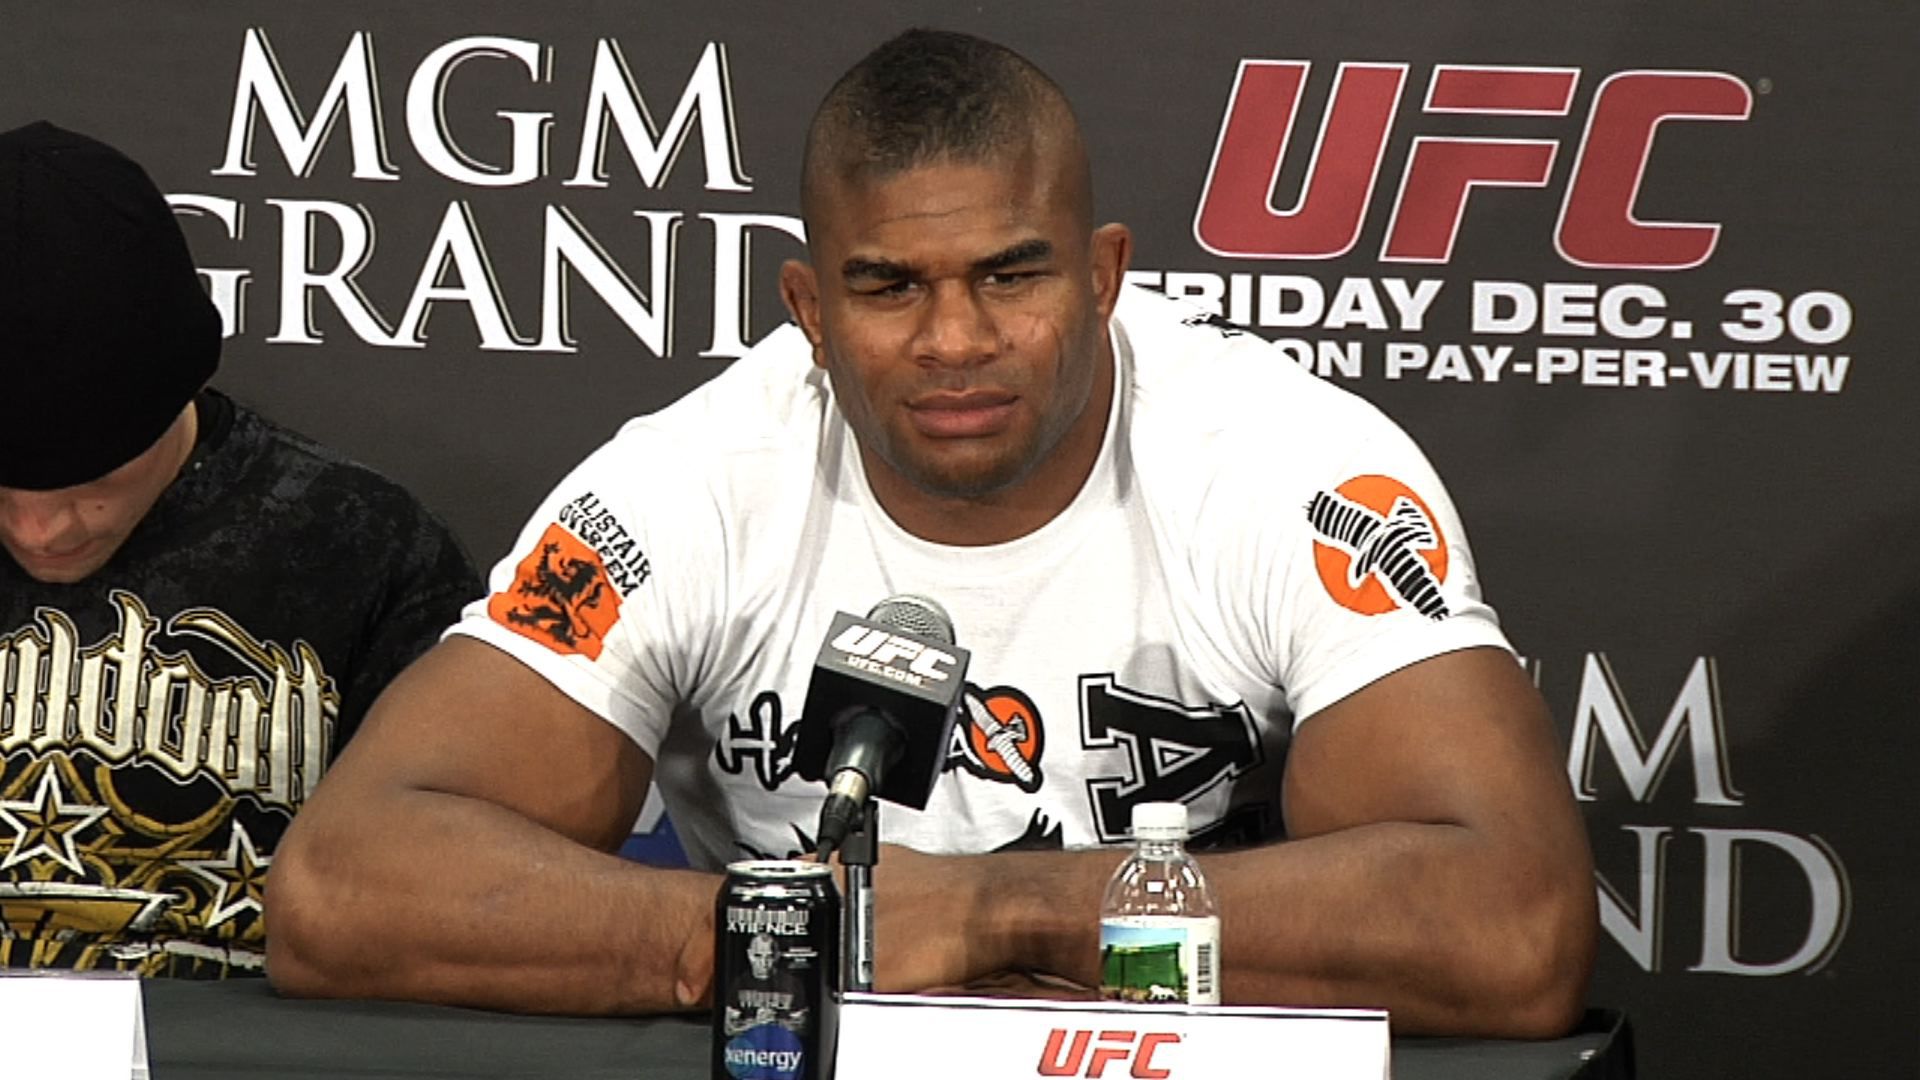 Ufc Fighter Alistair Overeem Wallpapers And Images Wallpapers Pictures Photos